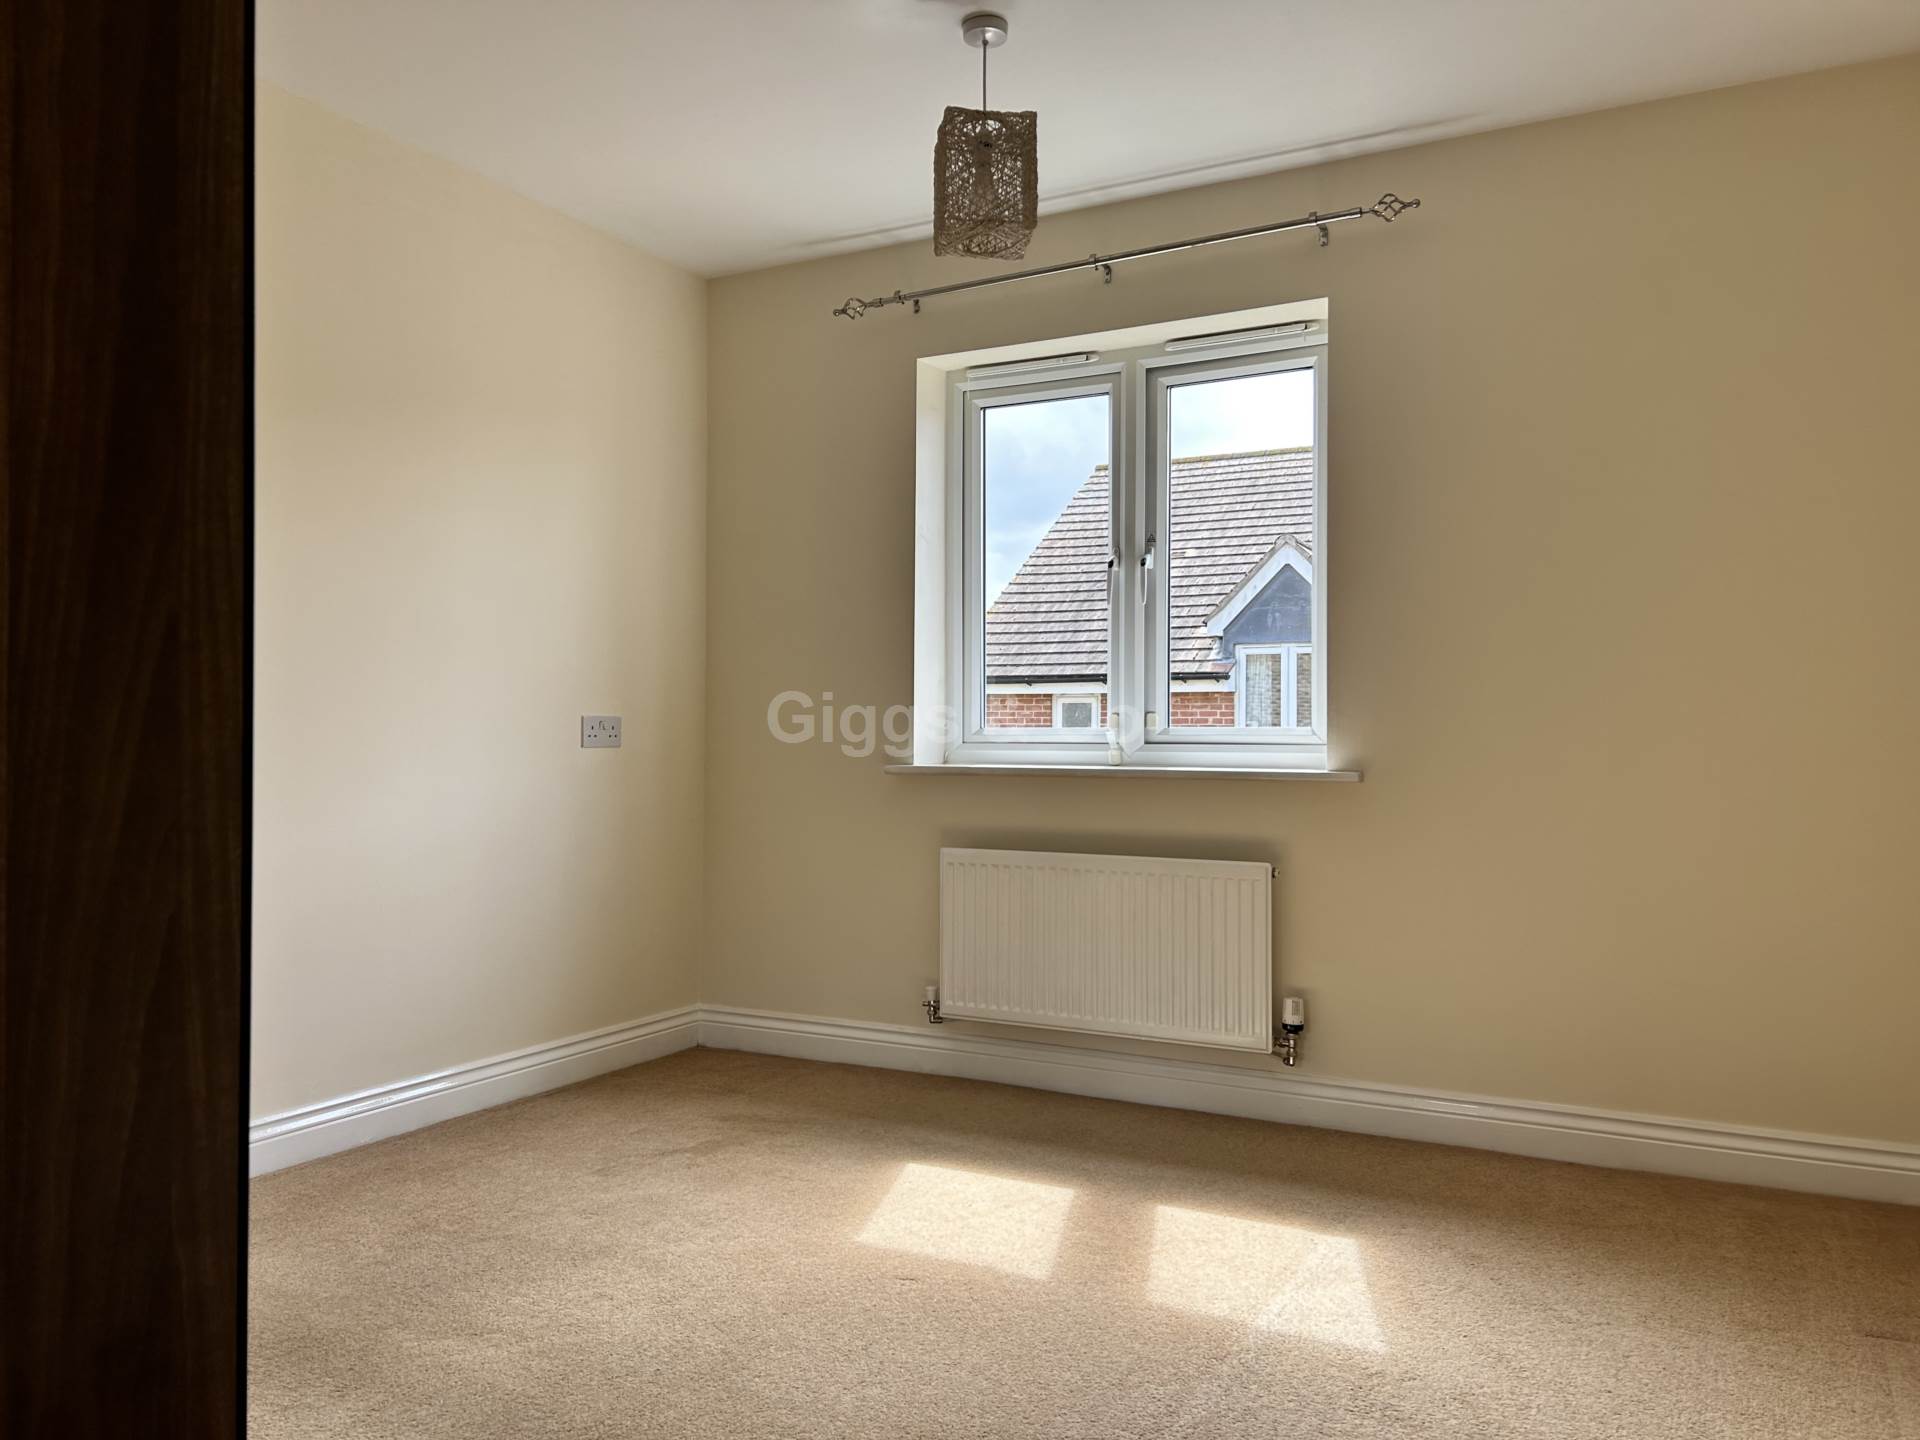 2 bed coach house to rent in Middle Ground, St Neots 3